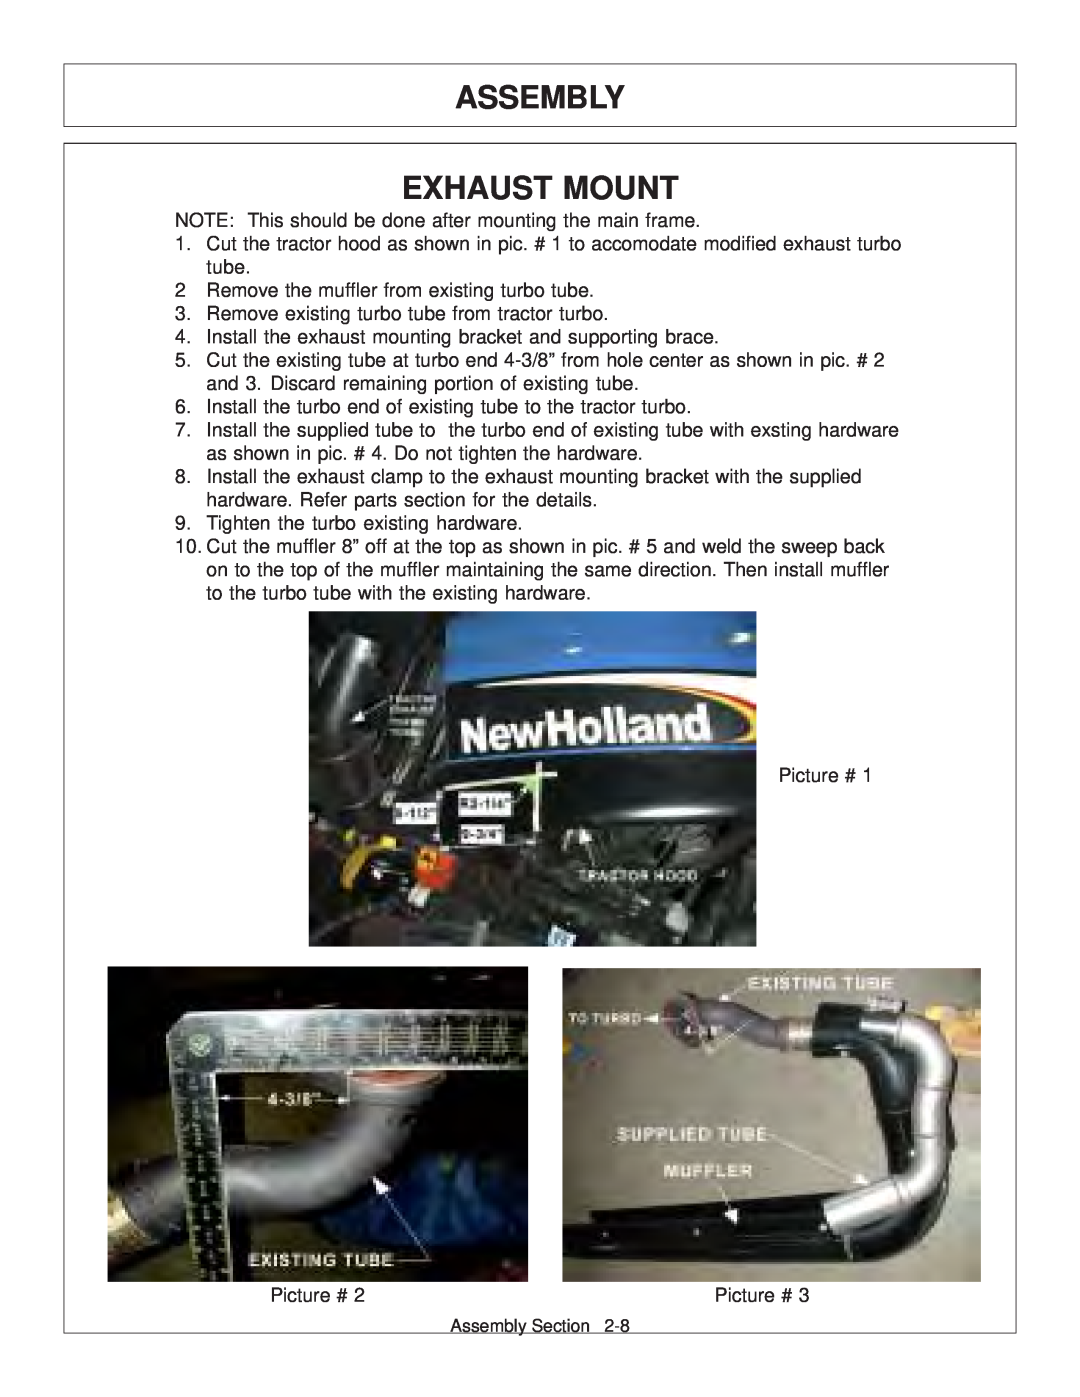 Tiger Products Co., Ltd 6020009 manual Assembly Exhaust Mount 